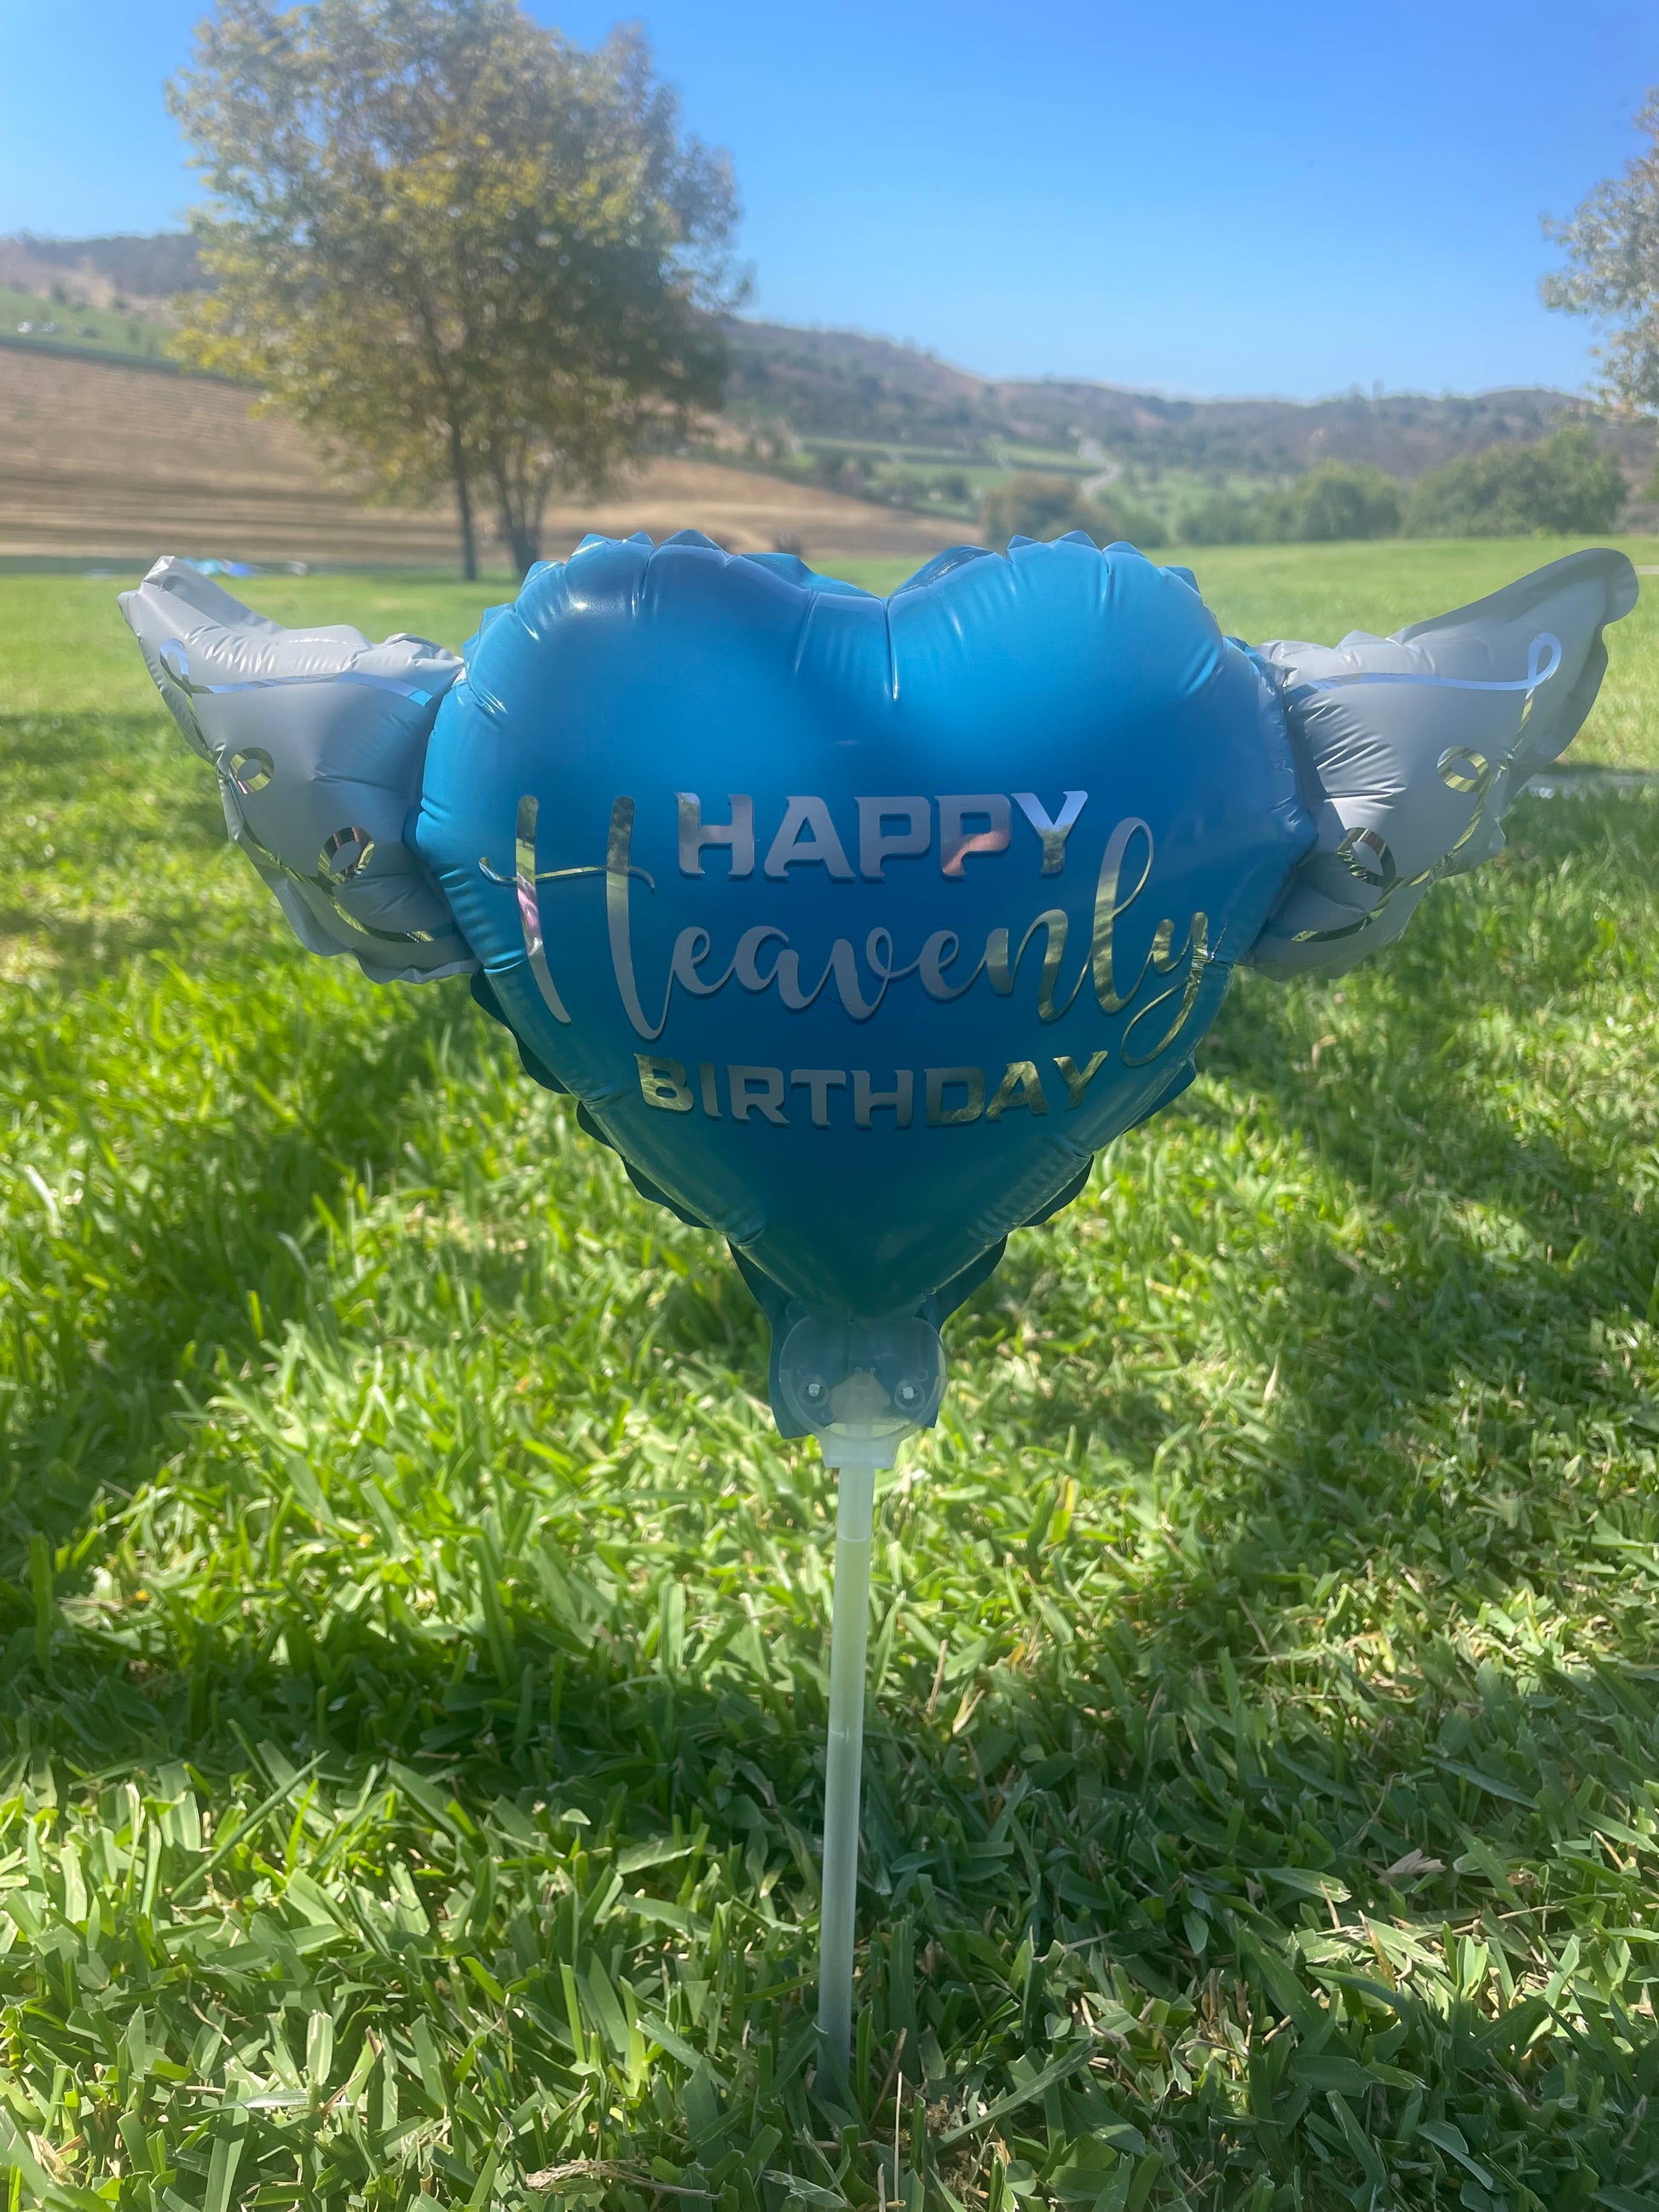 images of blue birthday balloons